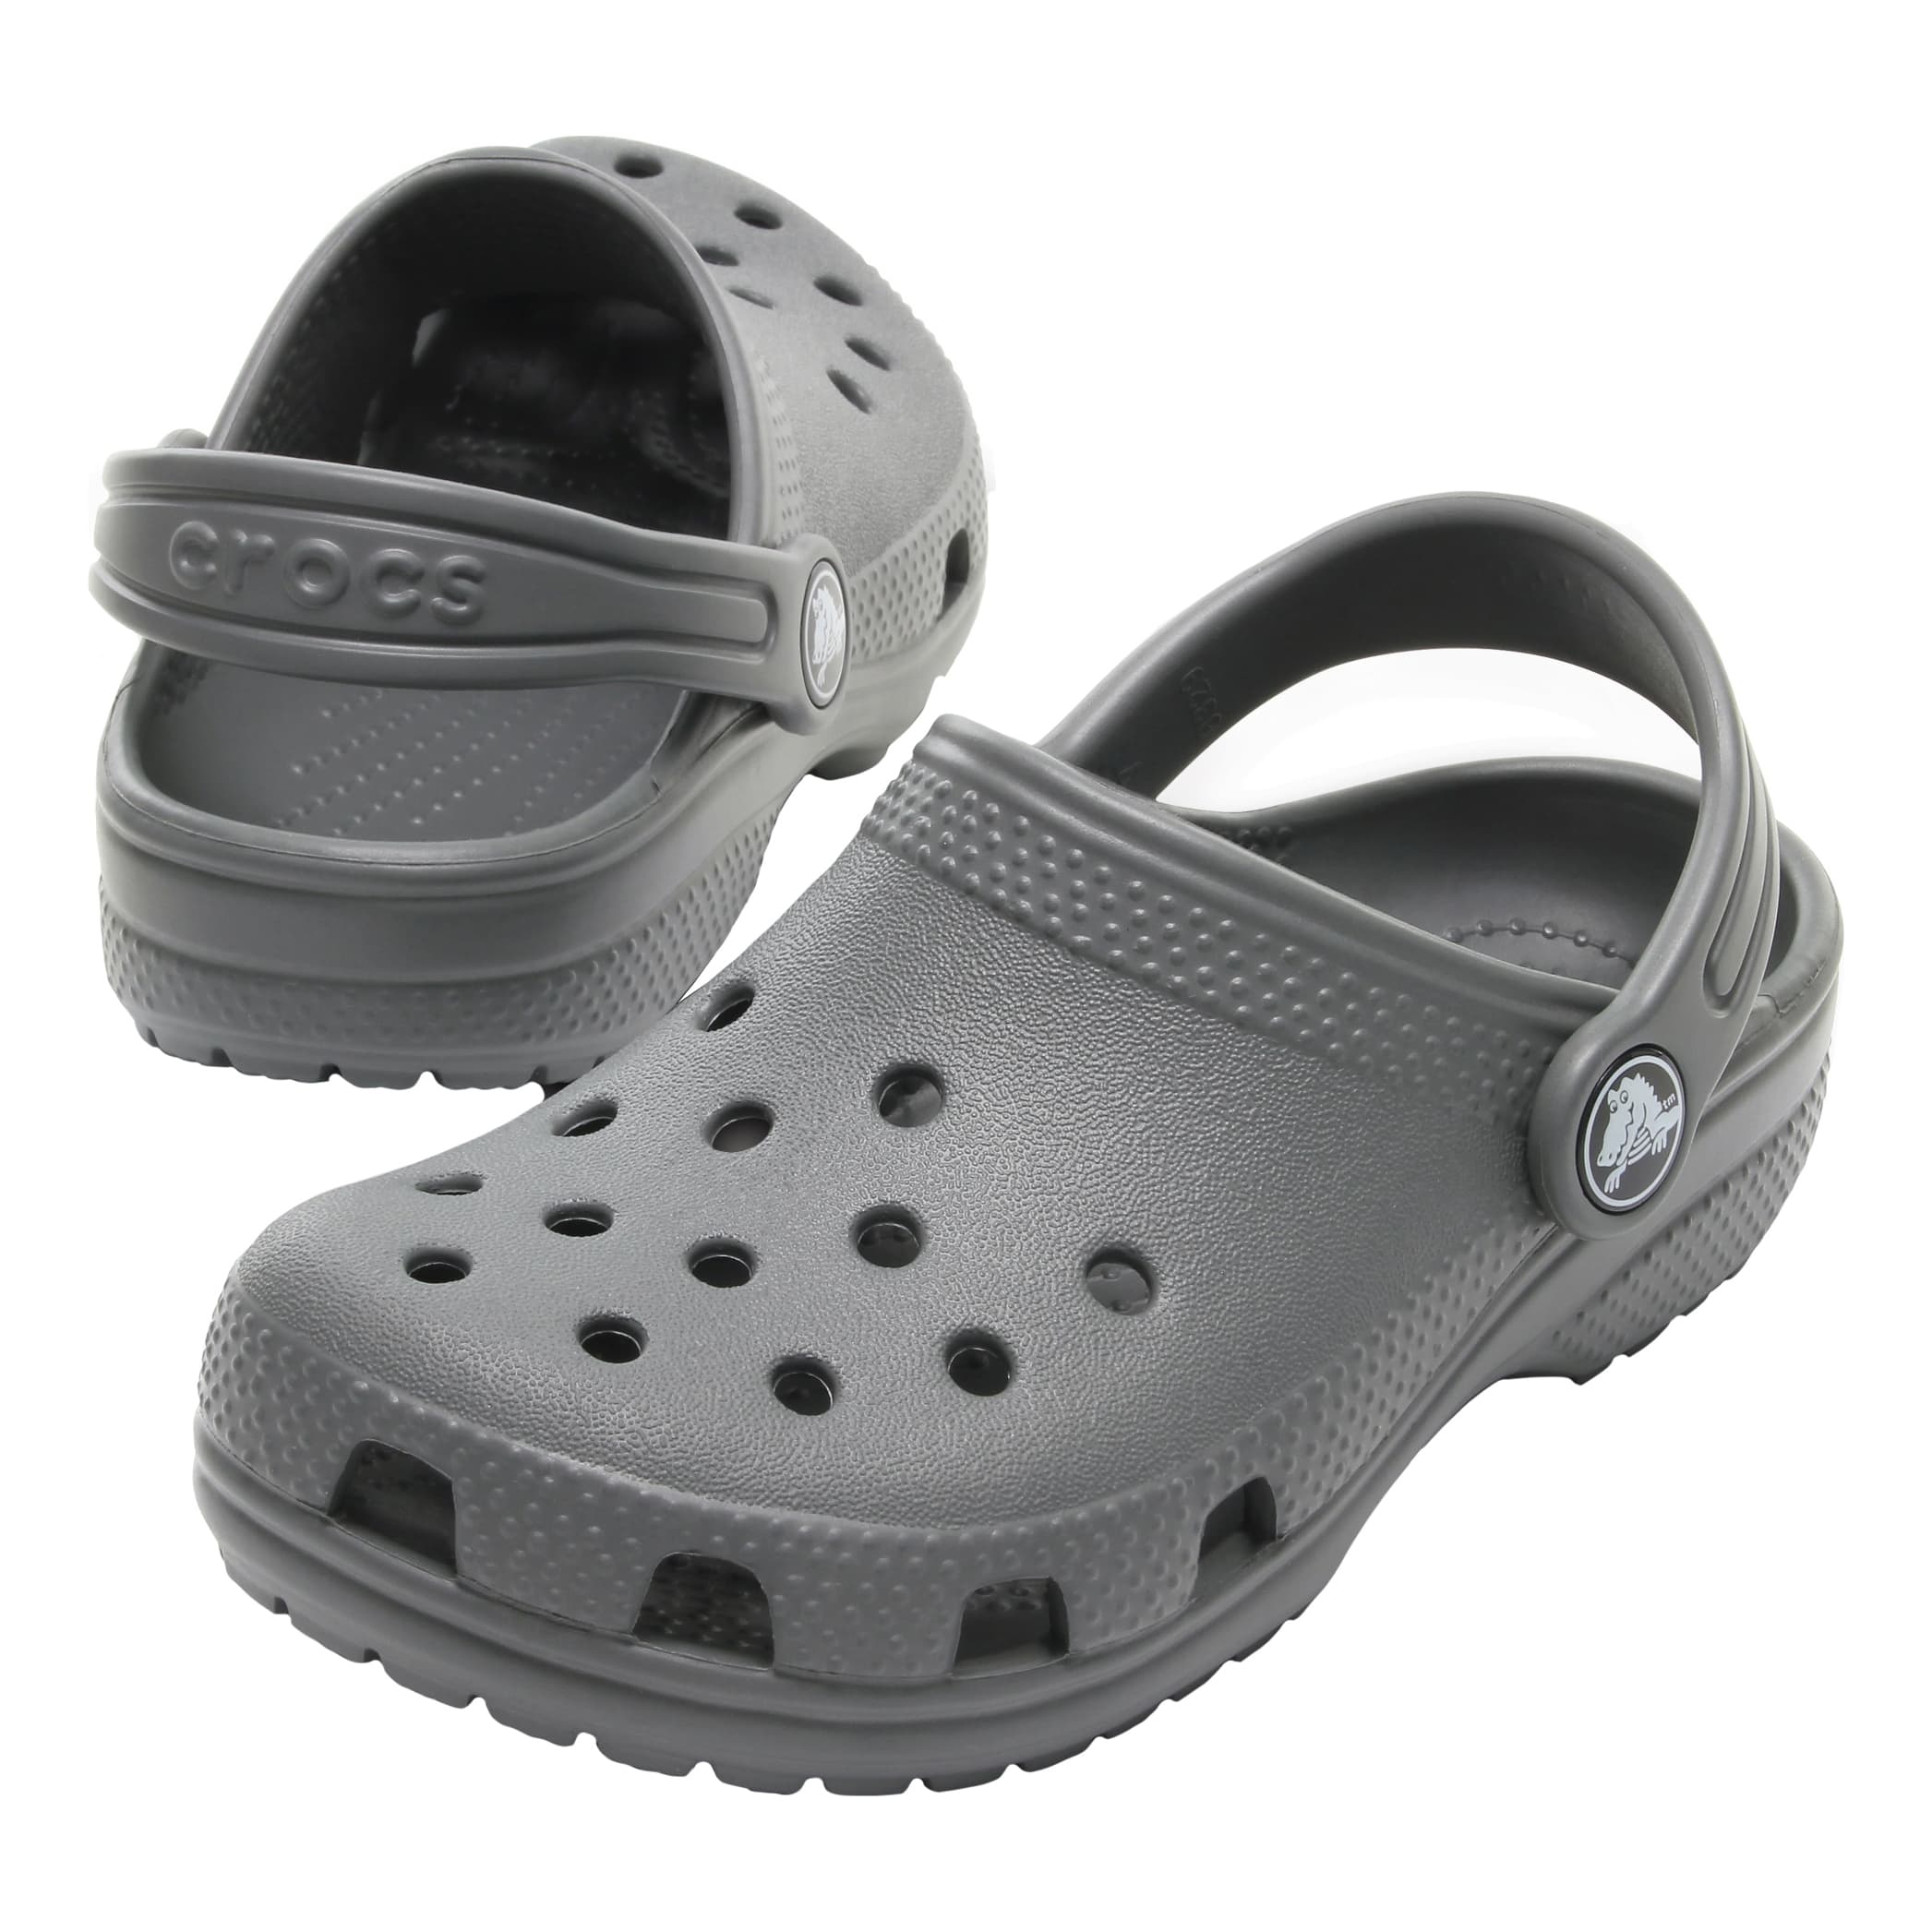 The Crocs™ Youth Classic Clog - pair